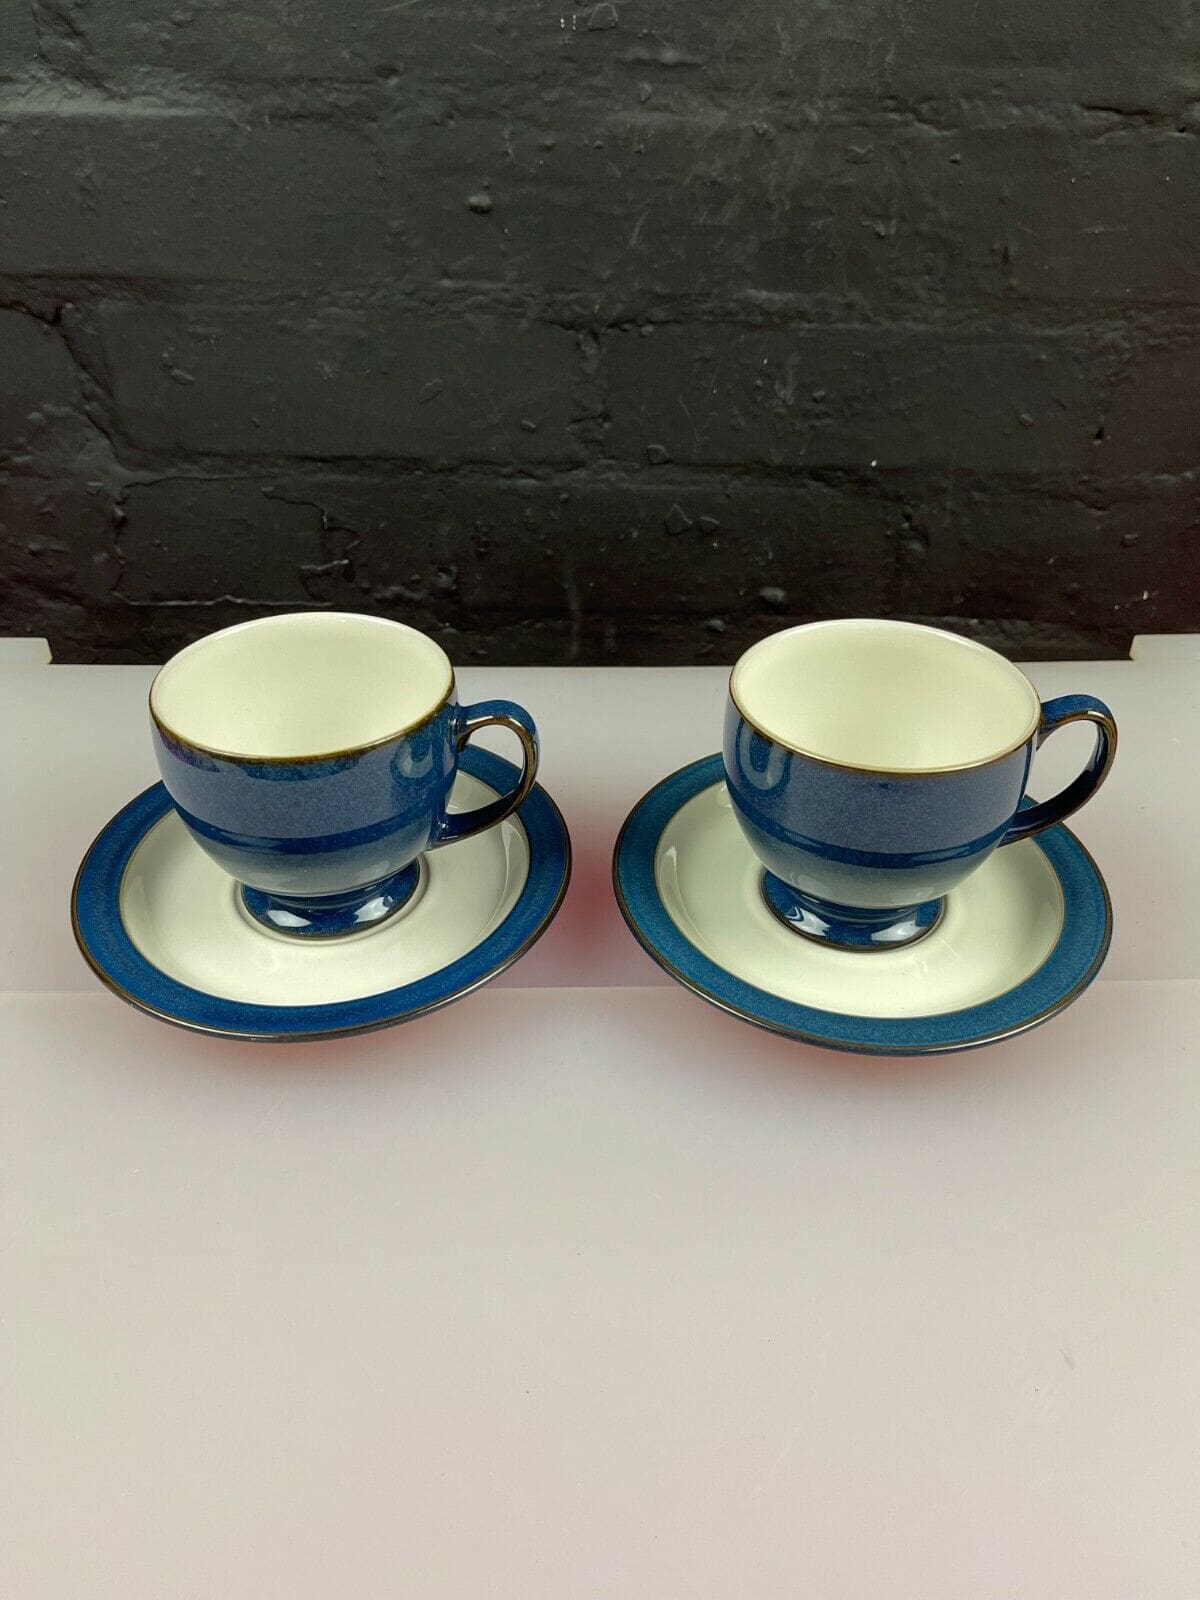 Denby Tea Cup and Saucer Boston several available 